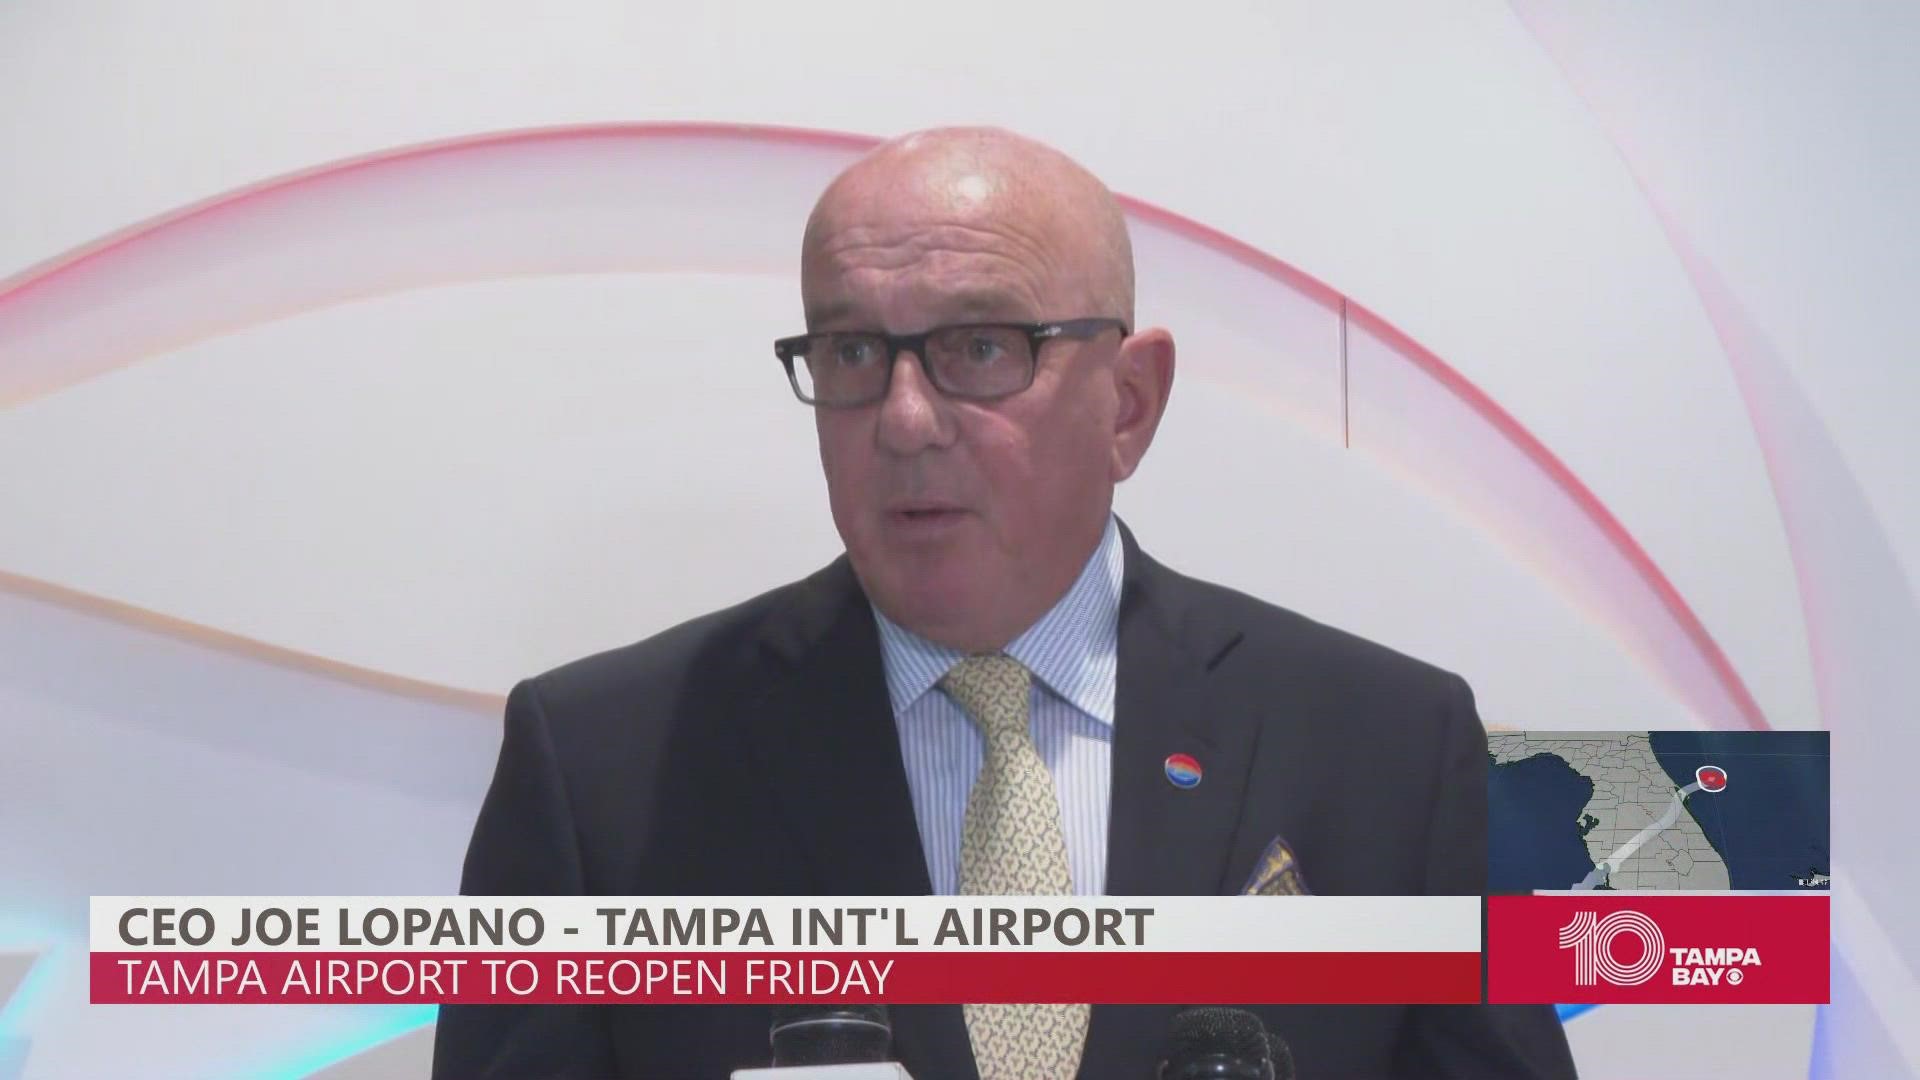 "We are just lucky," Tampa Airport CEO Joe Lopano said. Passenger flights will begin to arrive at 10 a.m. Friday, Sept. 30.